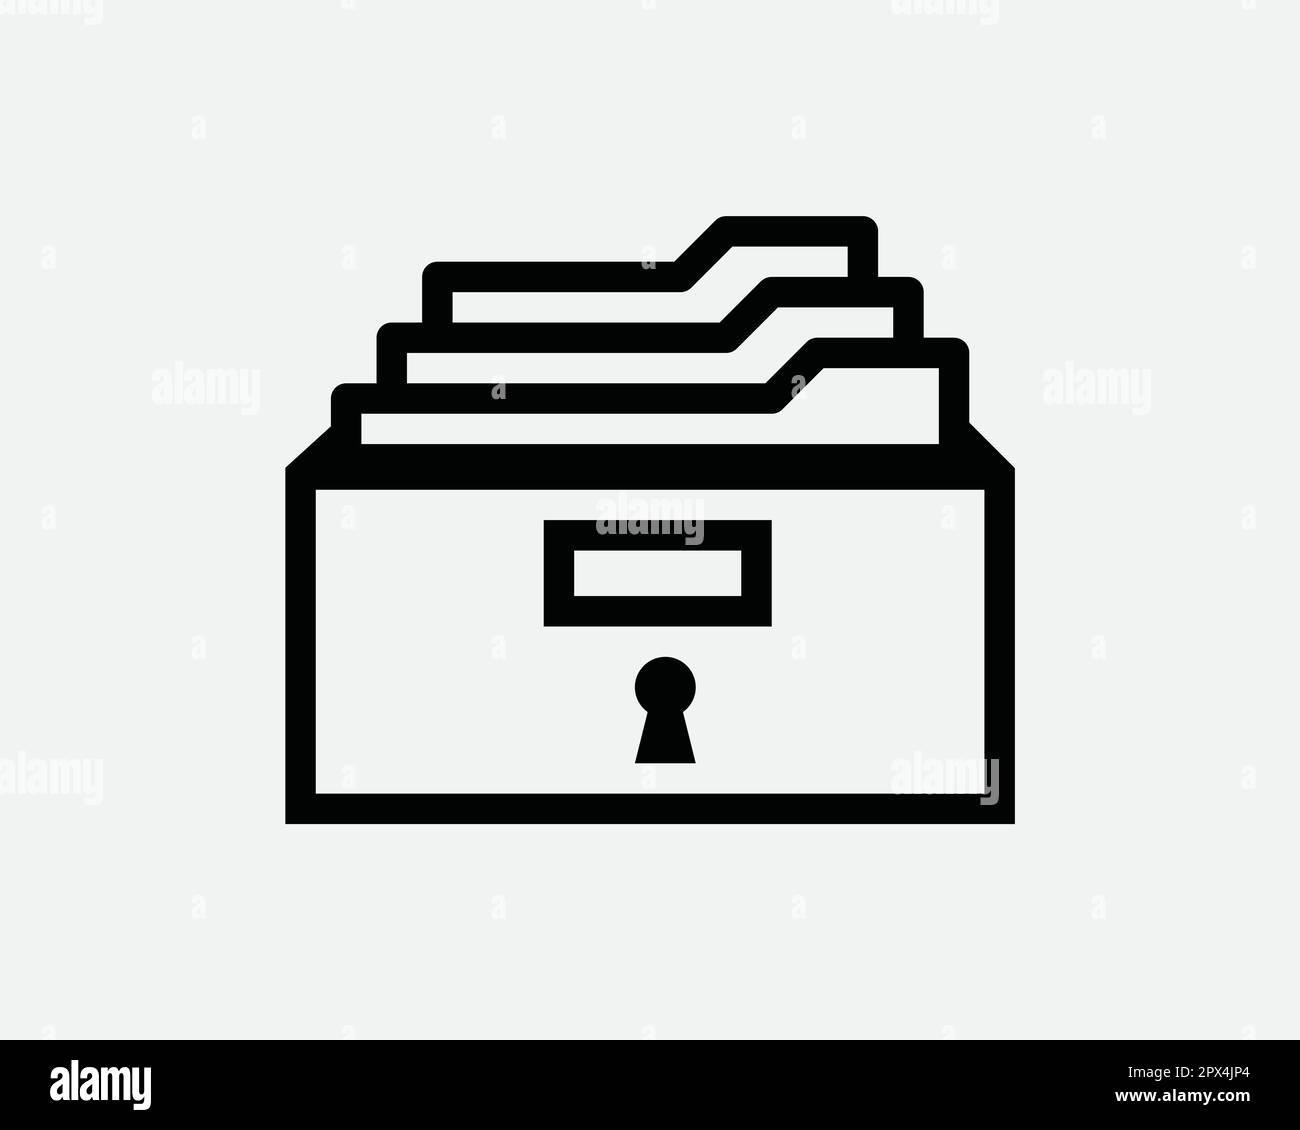 Lock Secure Folder Line Icon. Security Secret Safety Confidential Information Drawer Symbol. Archive Storage File Sign Linear Vector Graphic Clipart Stock Vector